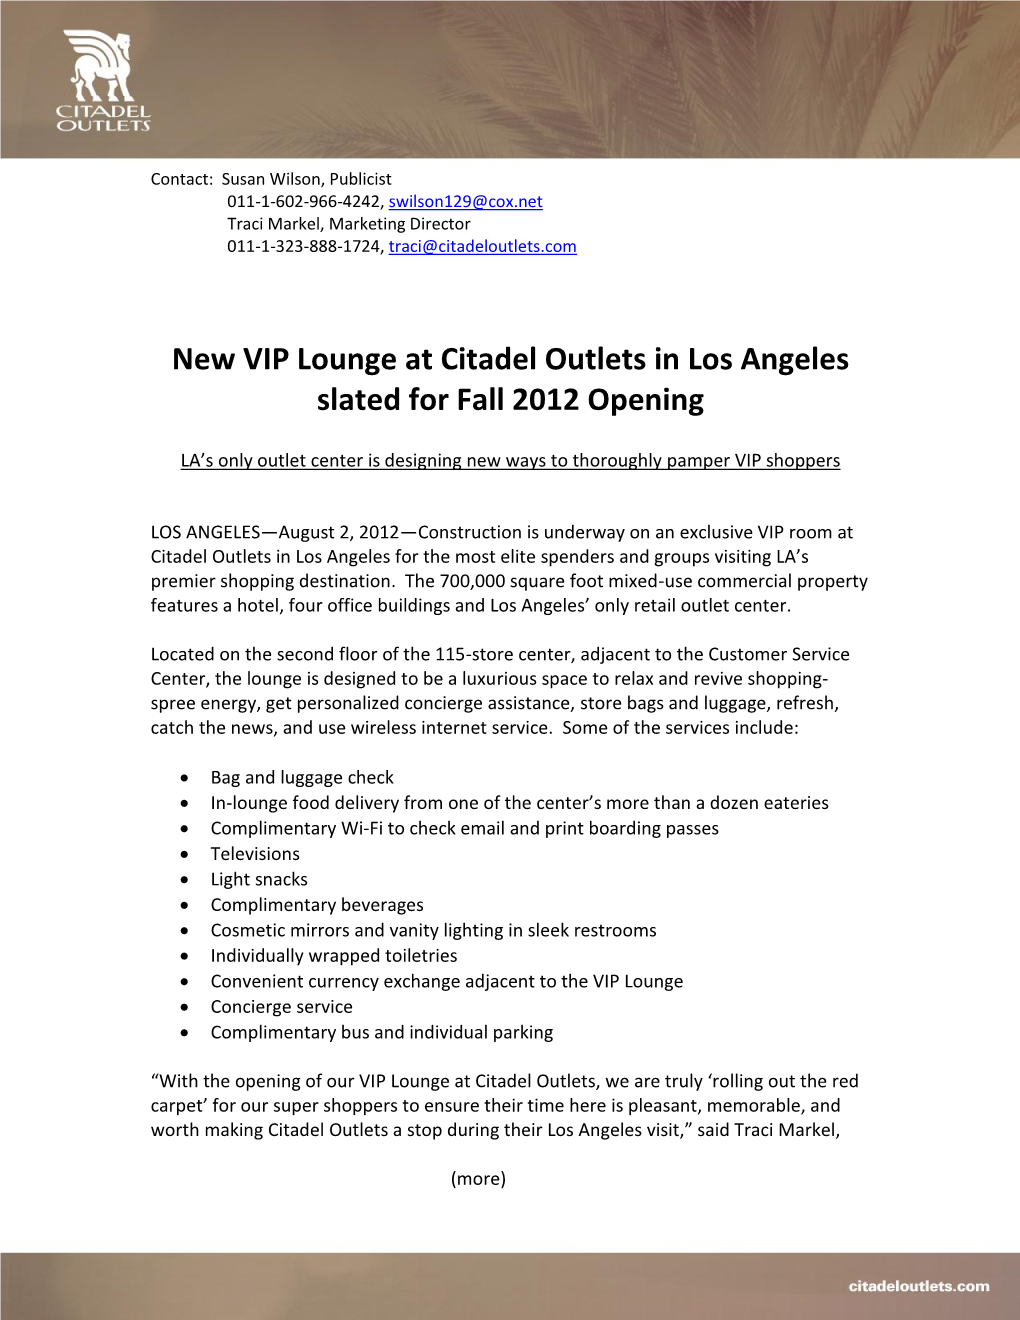 New VIP Lounge at Citadel Outlets in Los Angeles Slated for Fall 2012 Opening